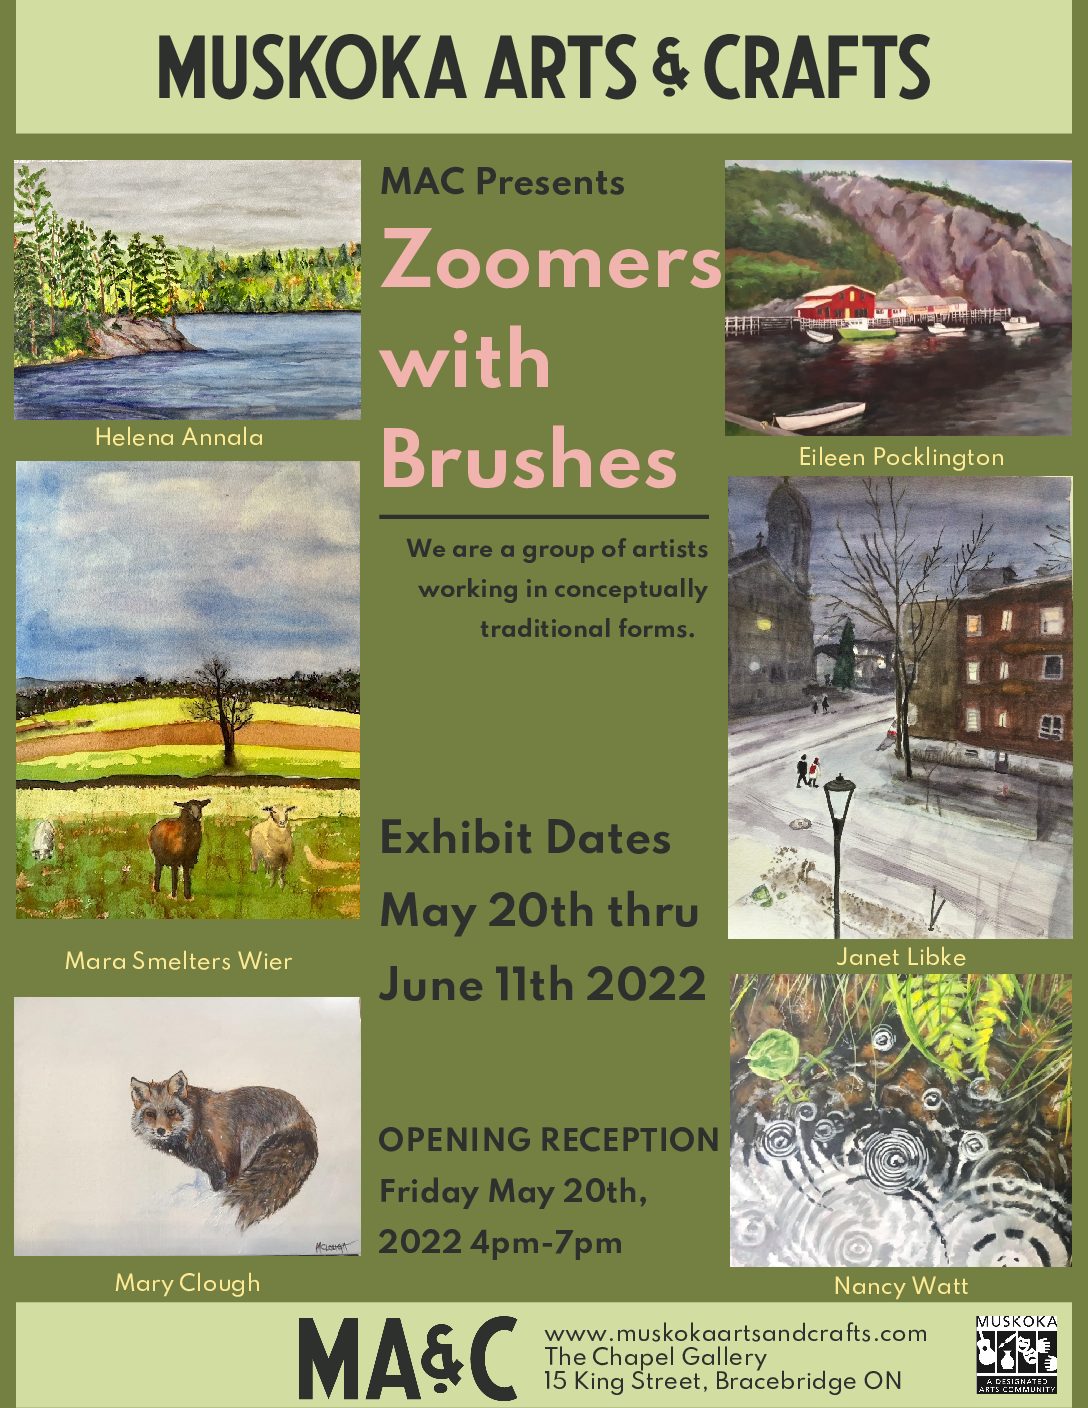 Zoomers with Brushes